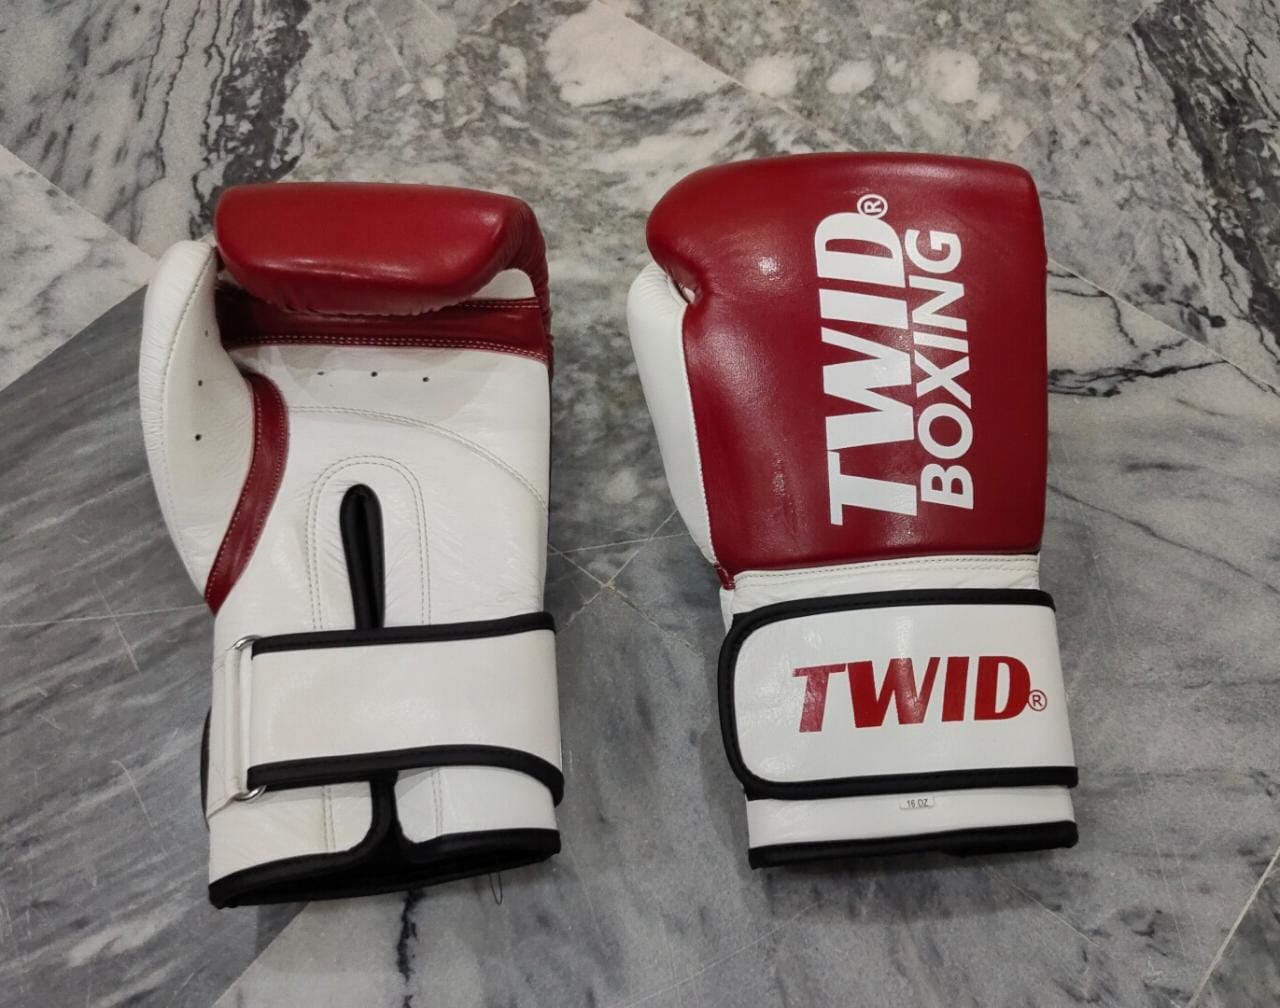 Twid Boxing gloves